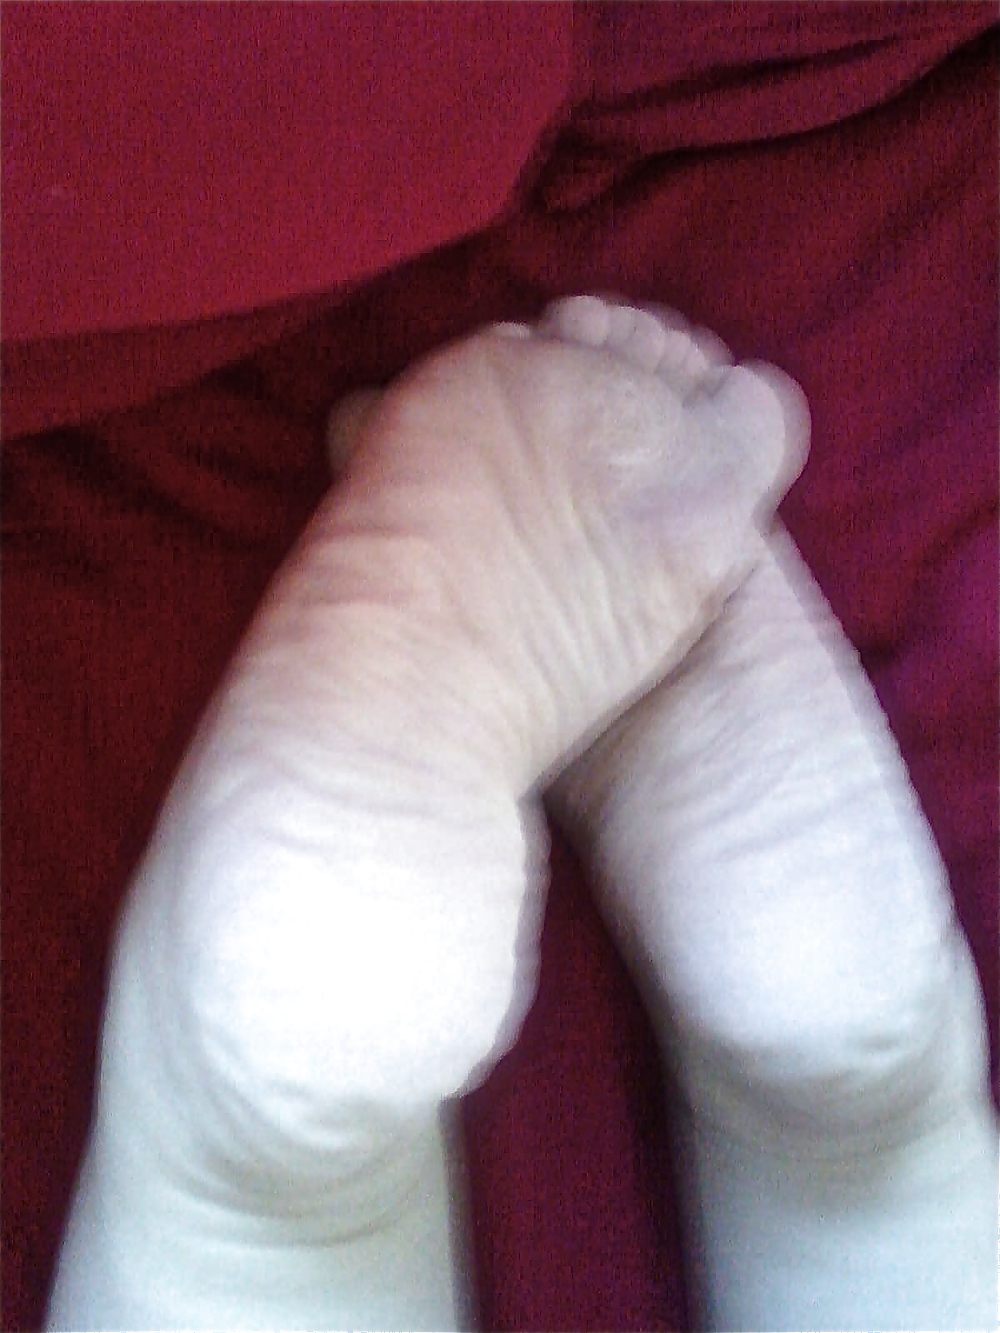 Soles I have had fun with #14813140